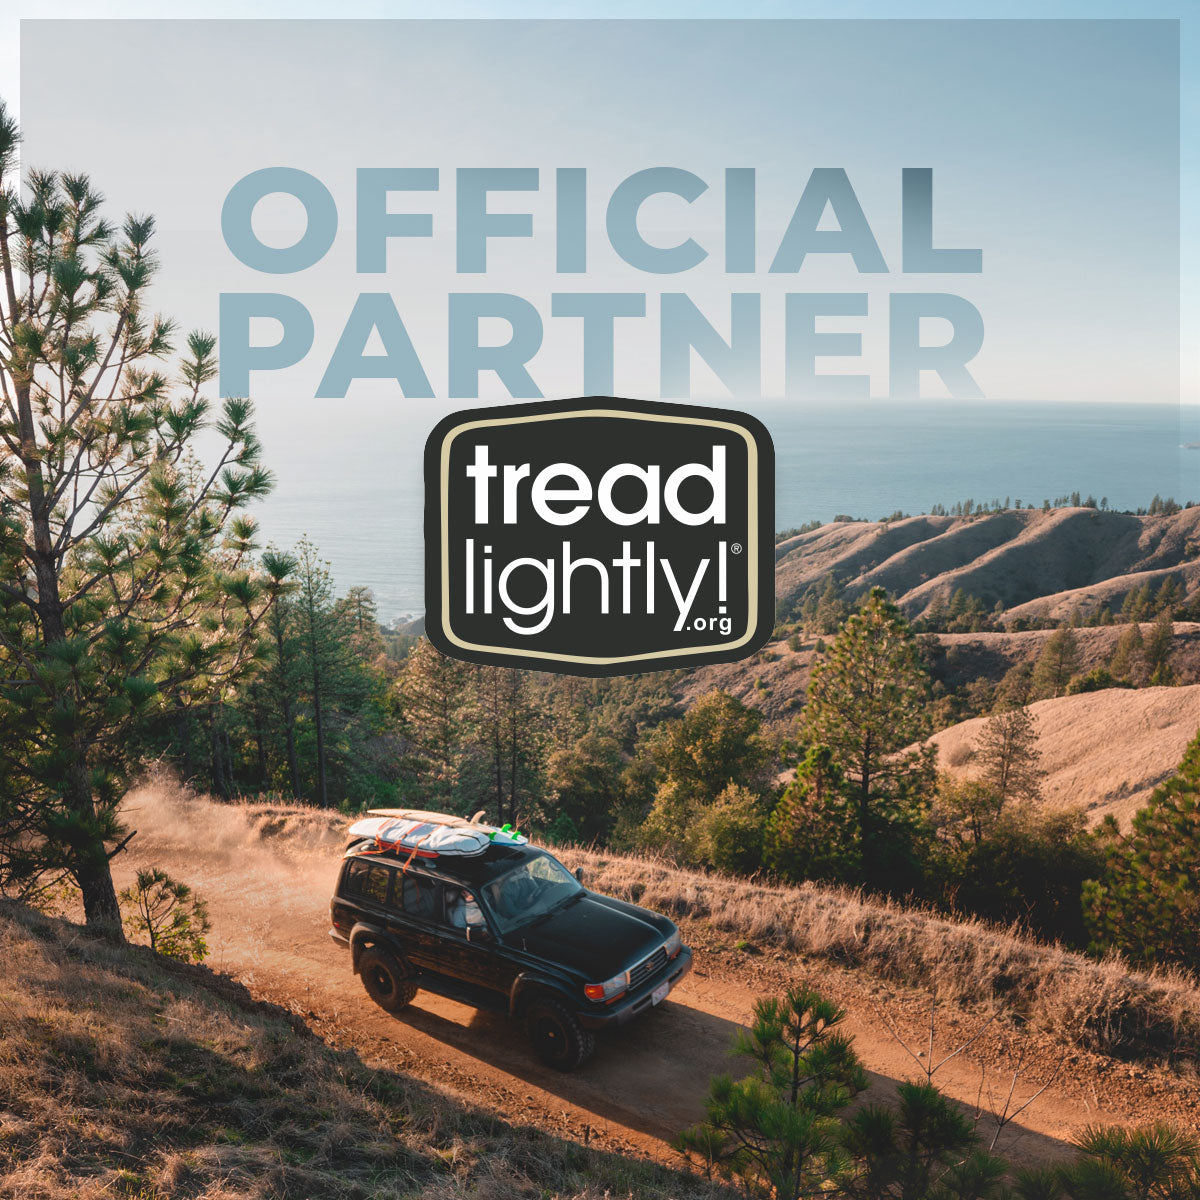 Scrubblade announces Tread Lightly as its newest Official Partner along with new membership benefit